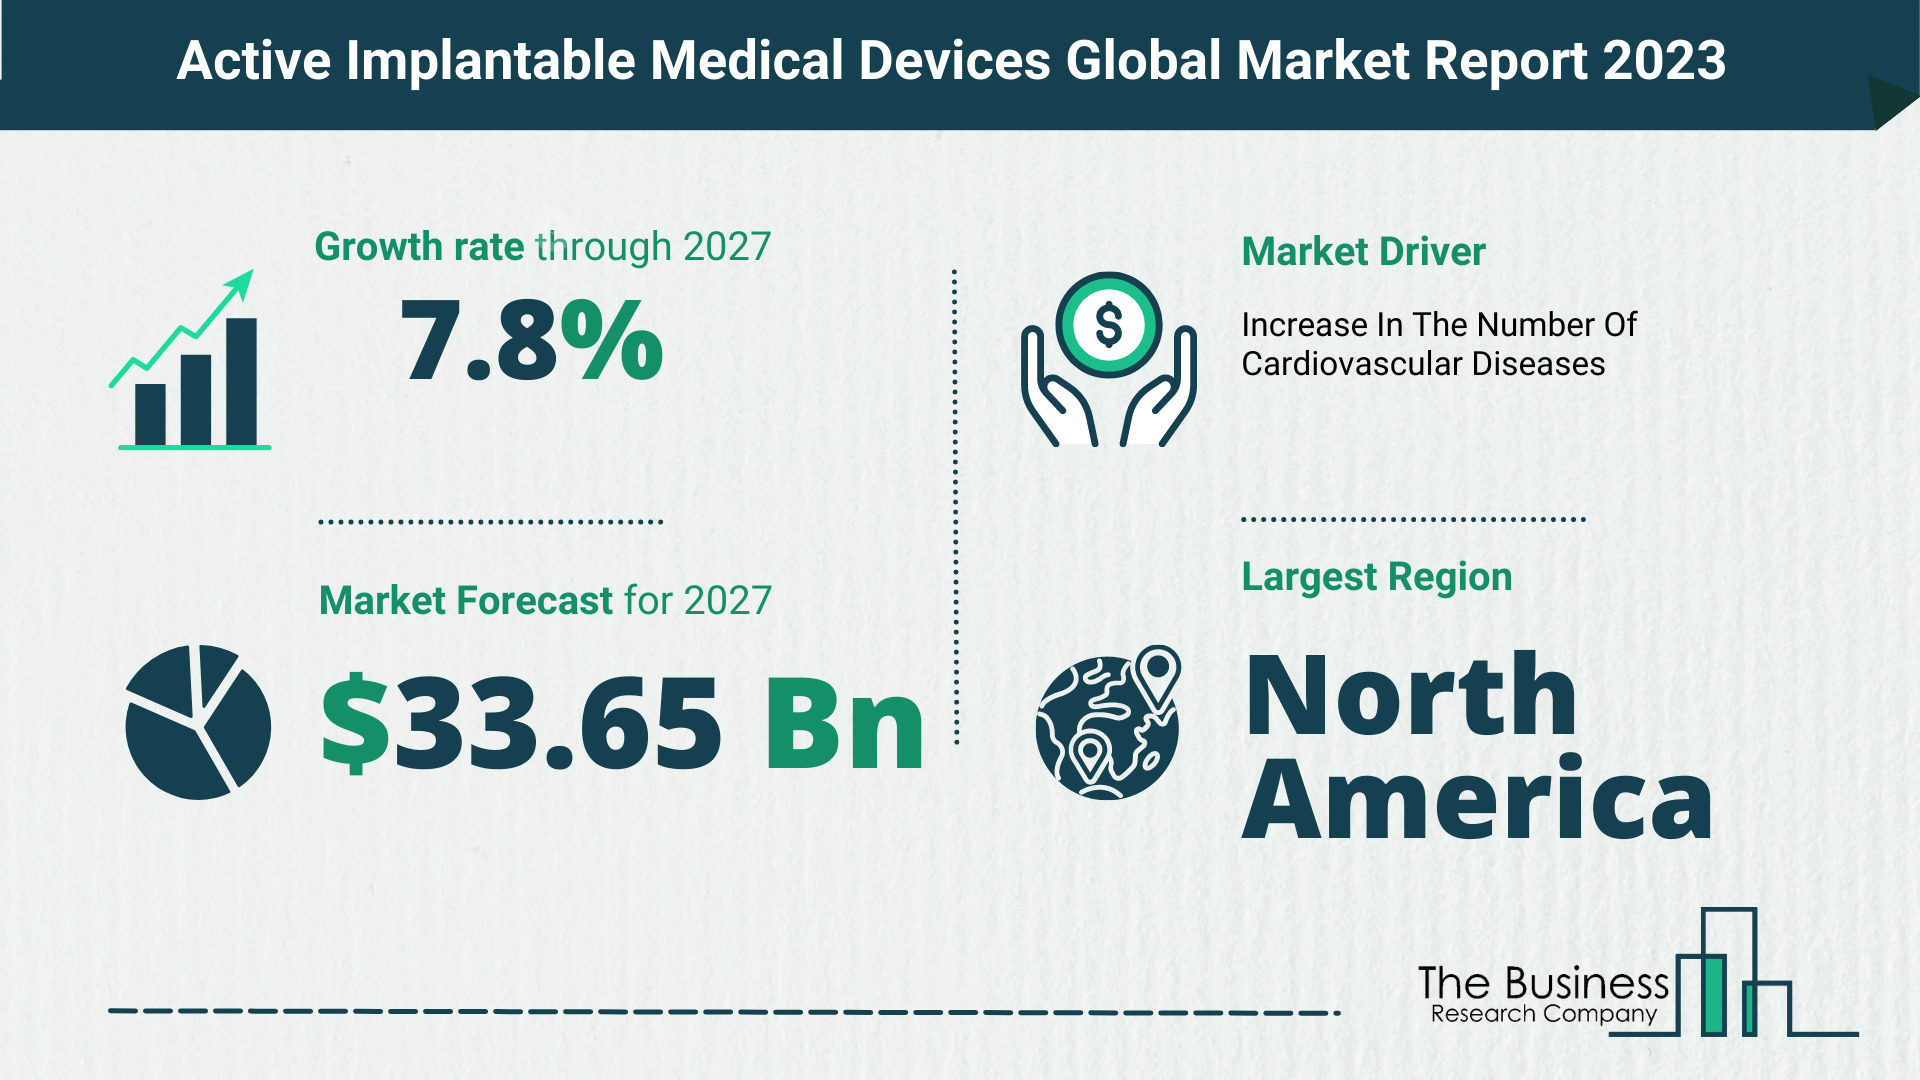 What Will The Active Implantable Medical Devices Market Look Like In 2023?